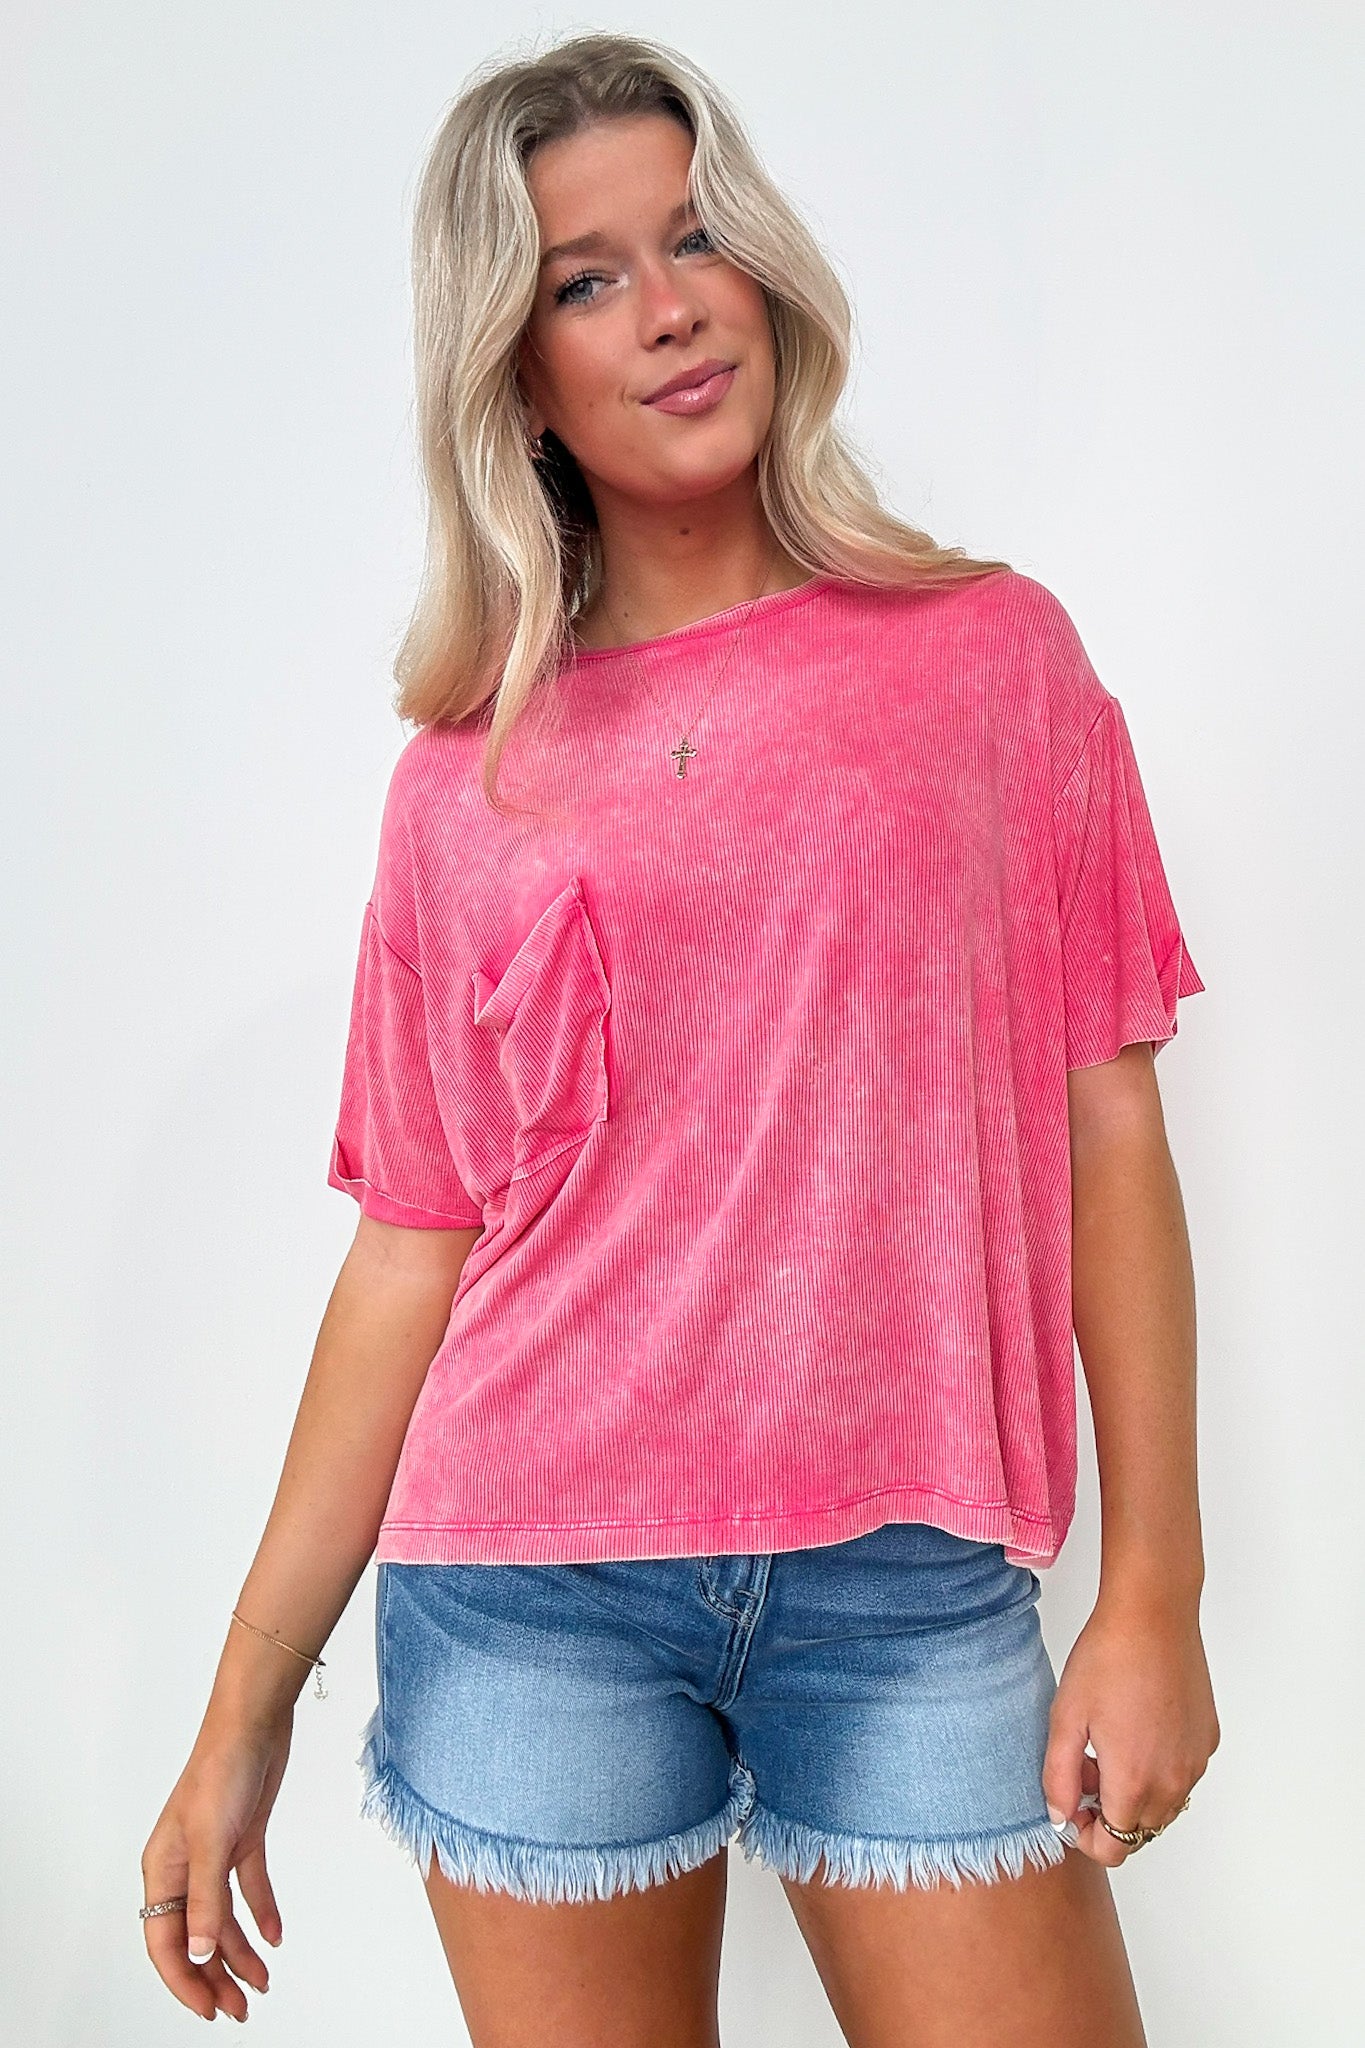  Rylee Mineral Wash Ribbed Relaxed Pocket Top - BACK IN STOCK - Madison and Mallory